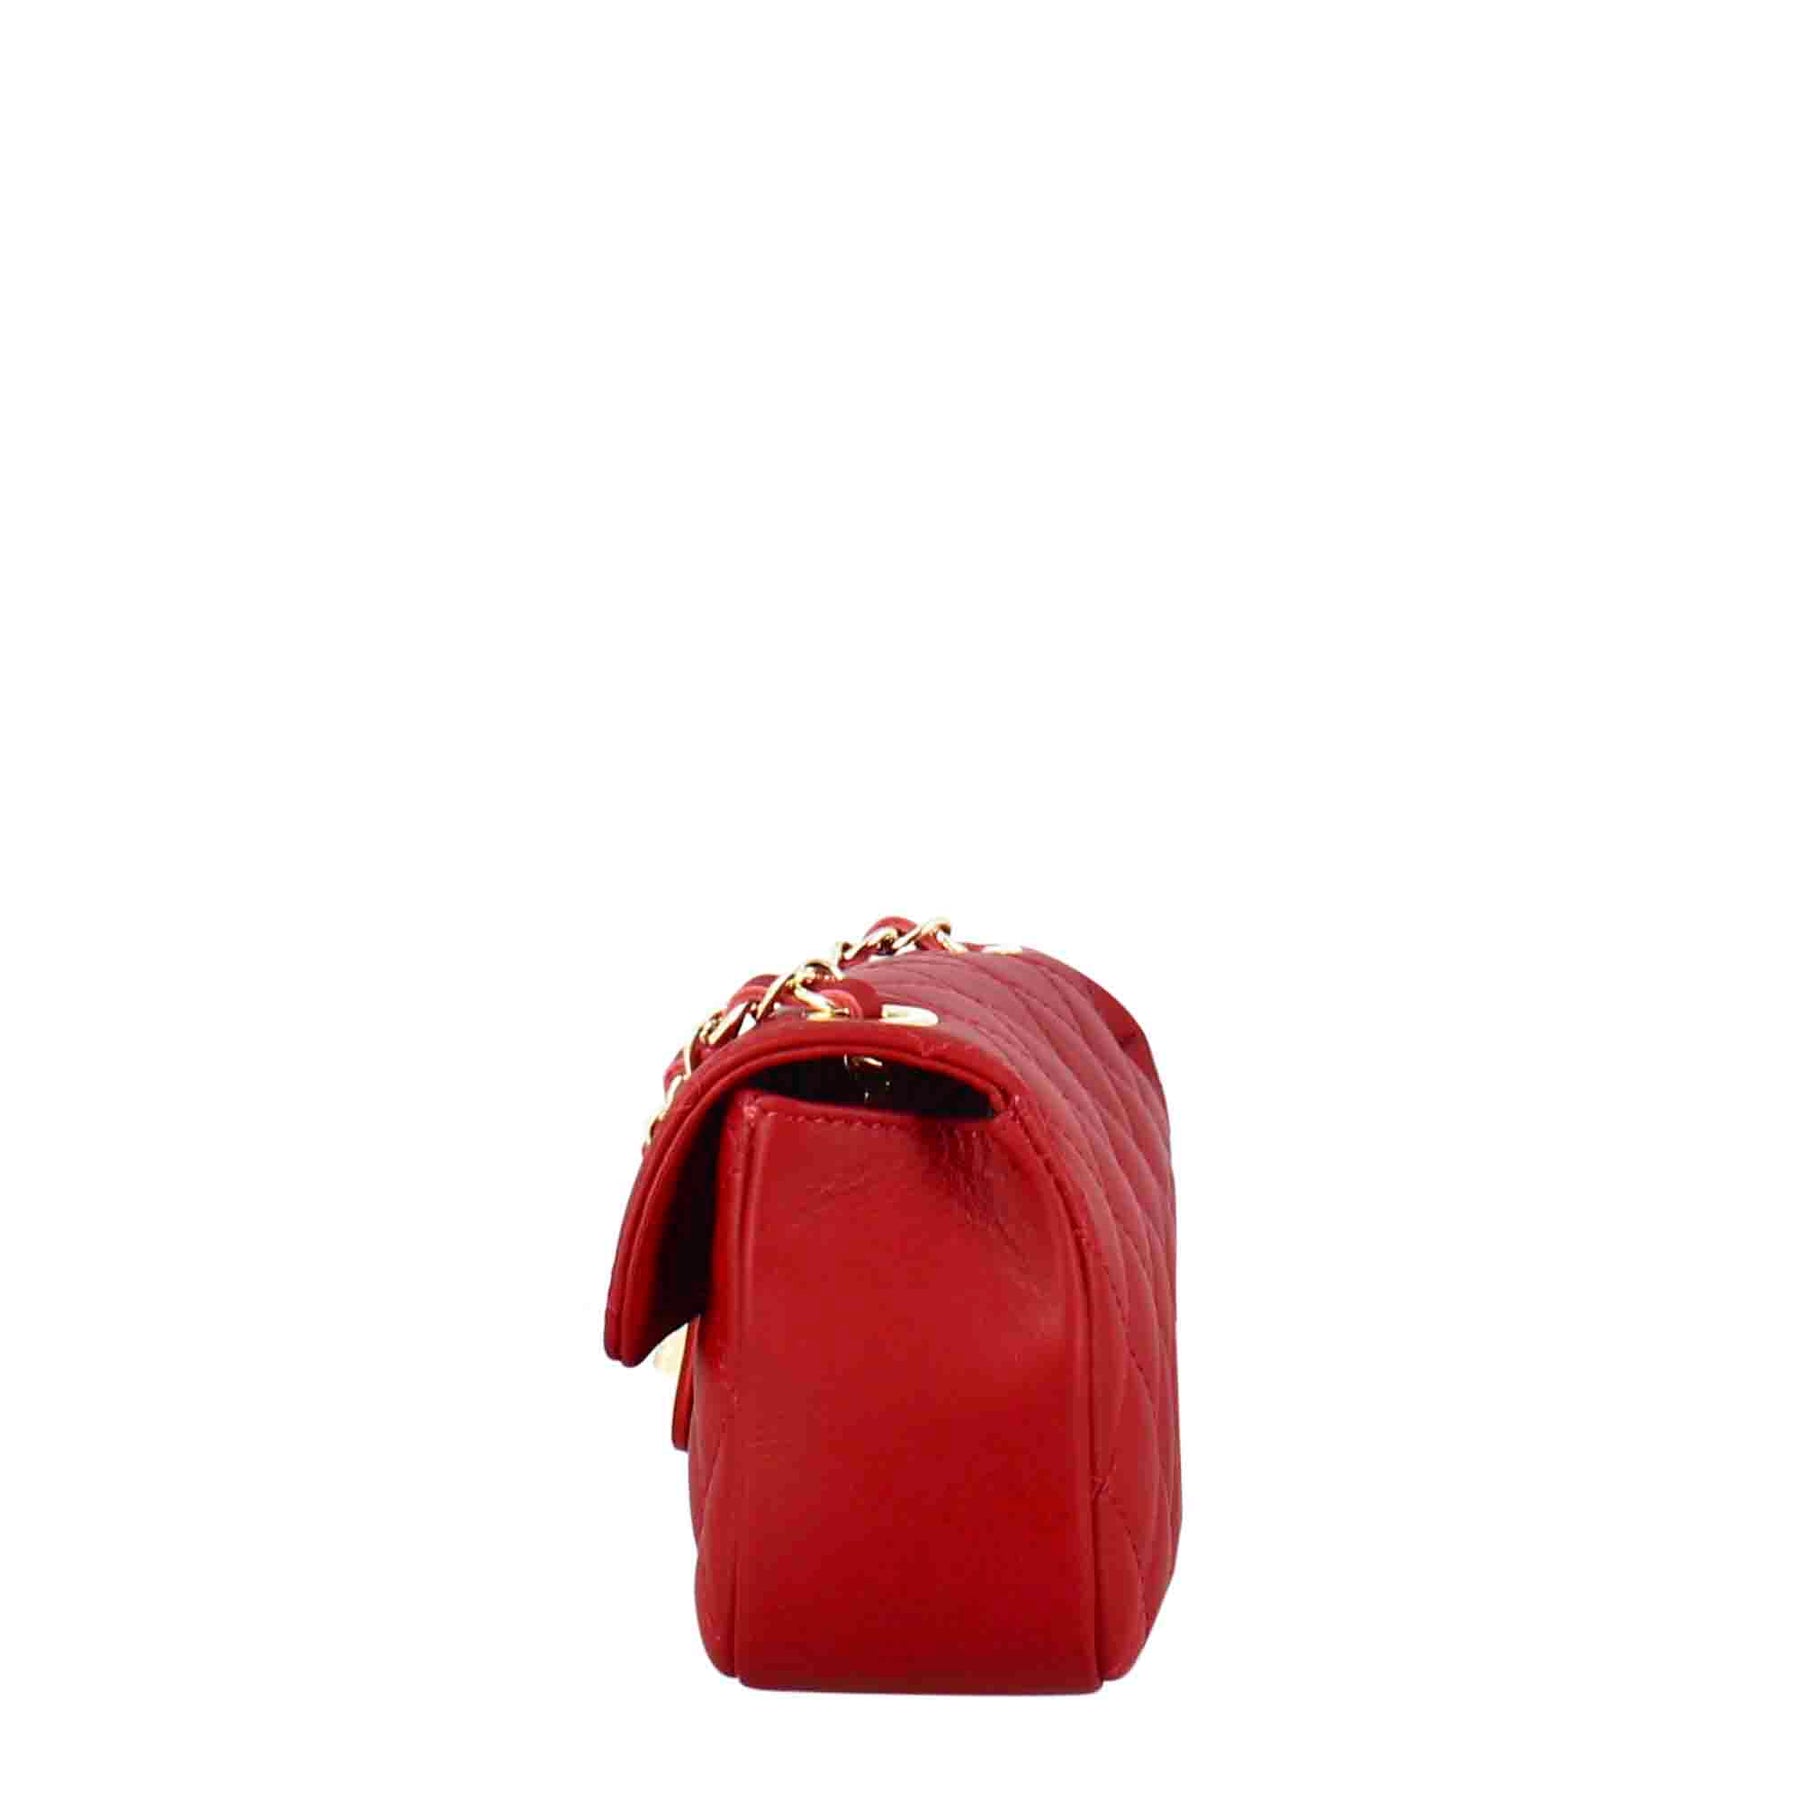 Vanity shoulder bag in red quilted leather